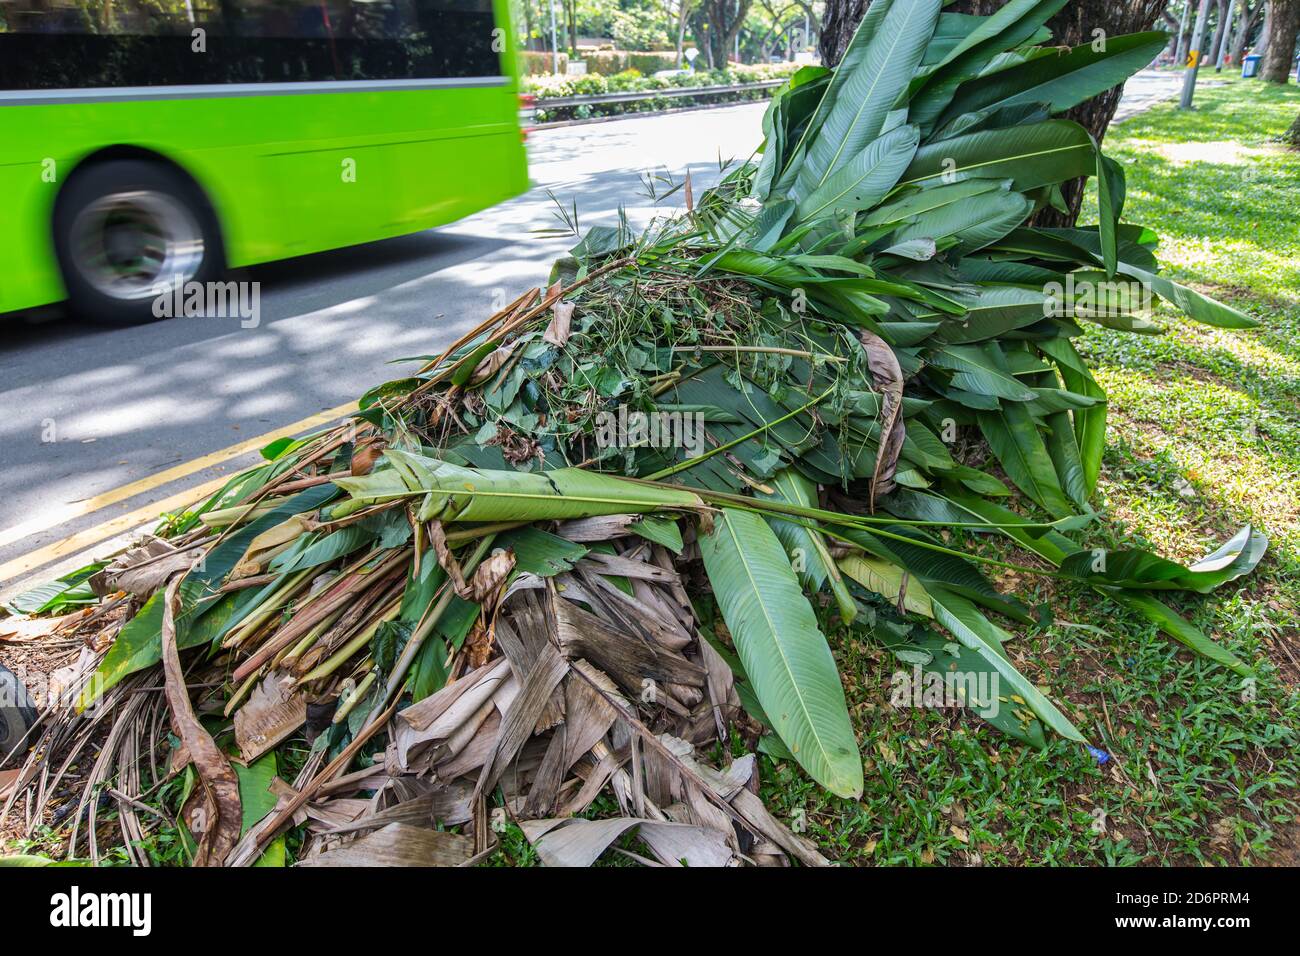 A pile of banana leaves been stacked up on the grass and against the tree while waiting to be clear up. Singapore. Stock Photo